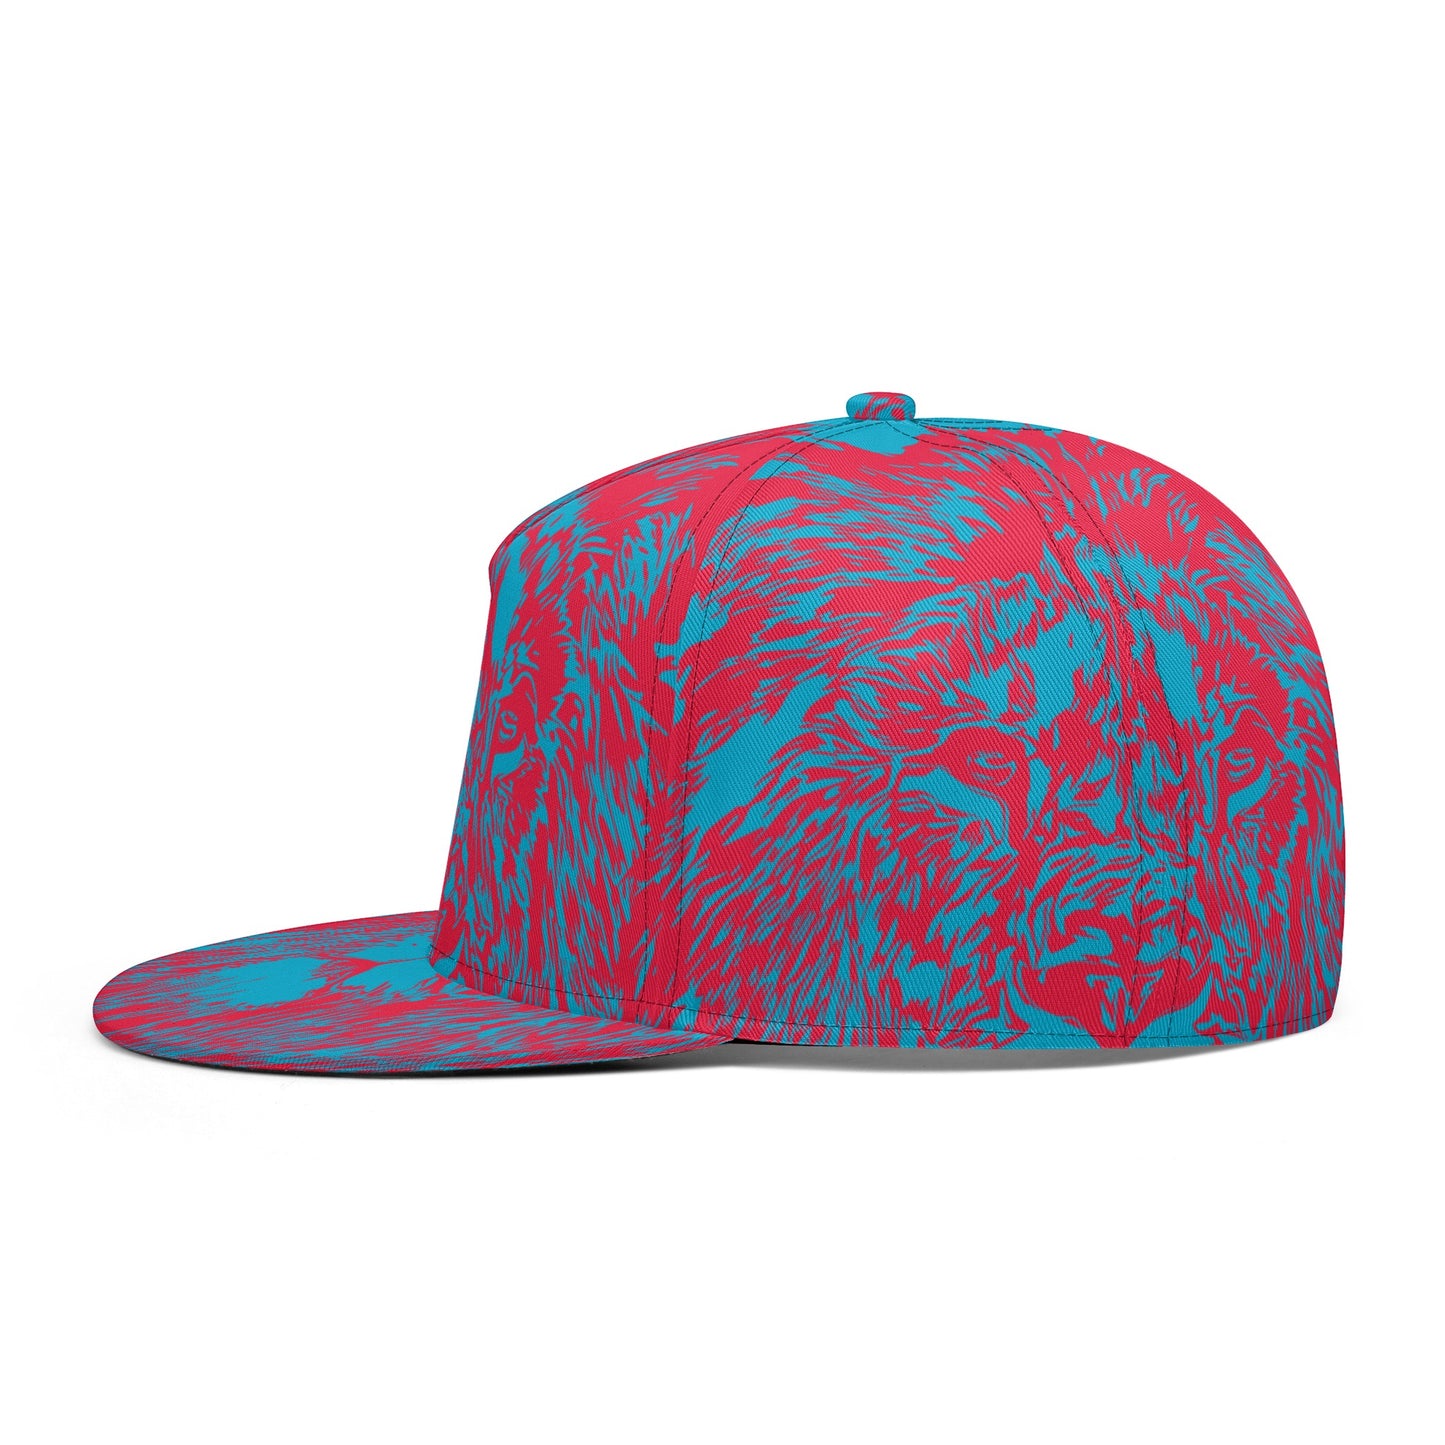 Nauvoo Skateboarding Blue and Red Lion Ball Cap